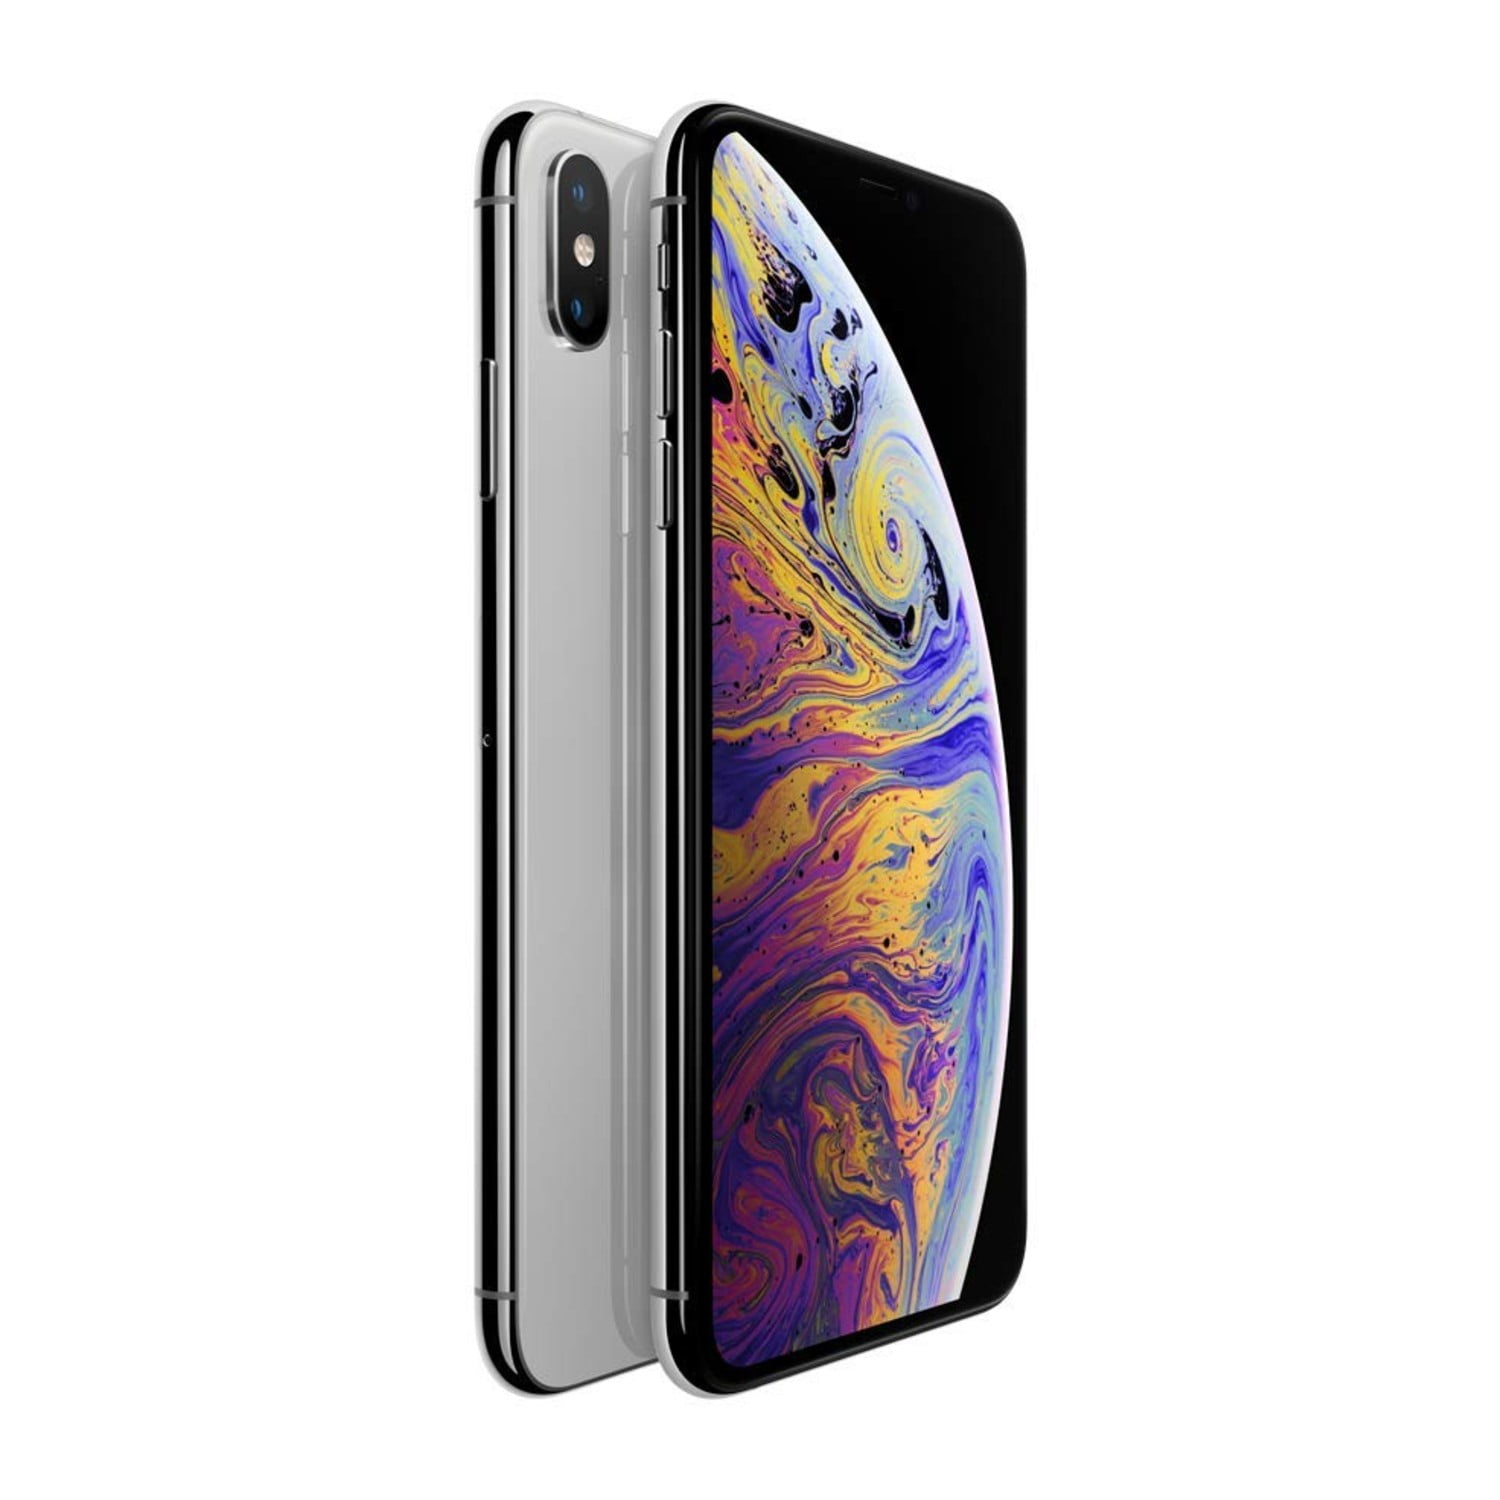 Restored Apple iPhone XS Max a1921 64GB Silver Factory Unlocked  (Refurbished)